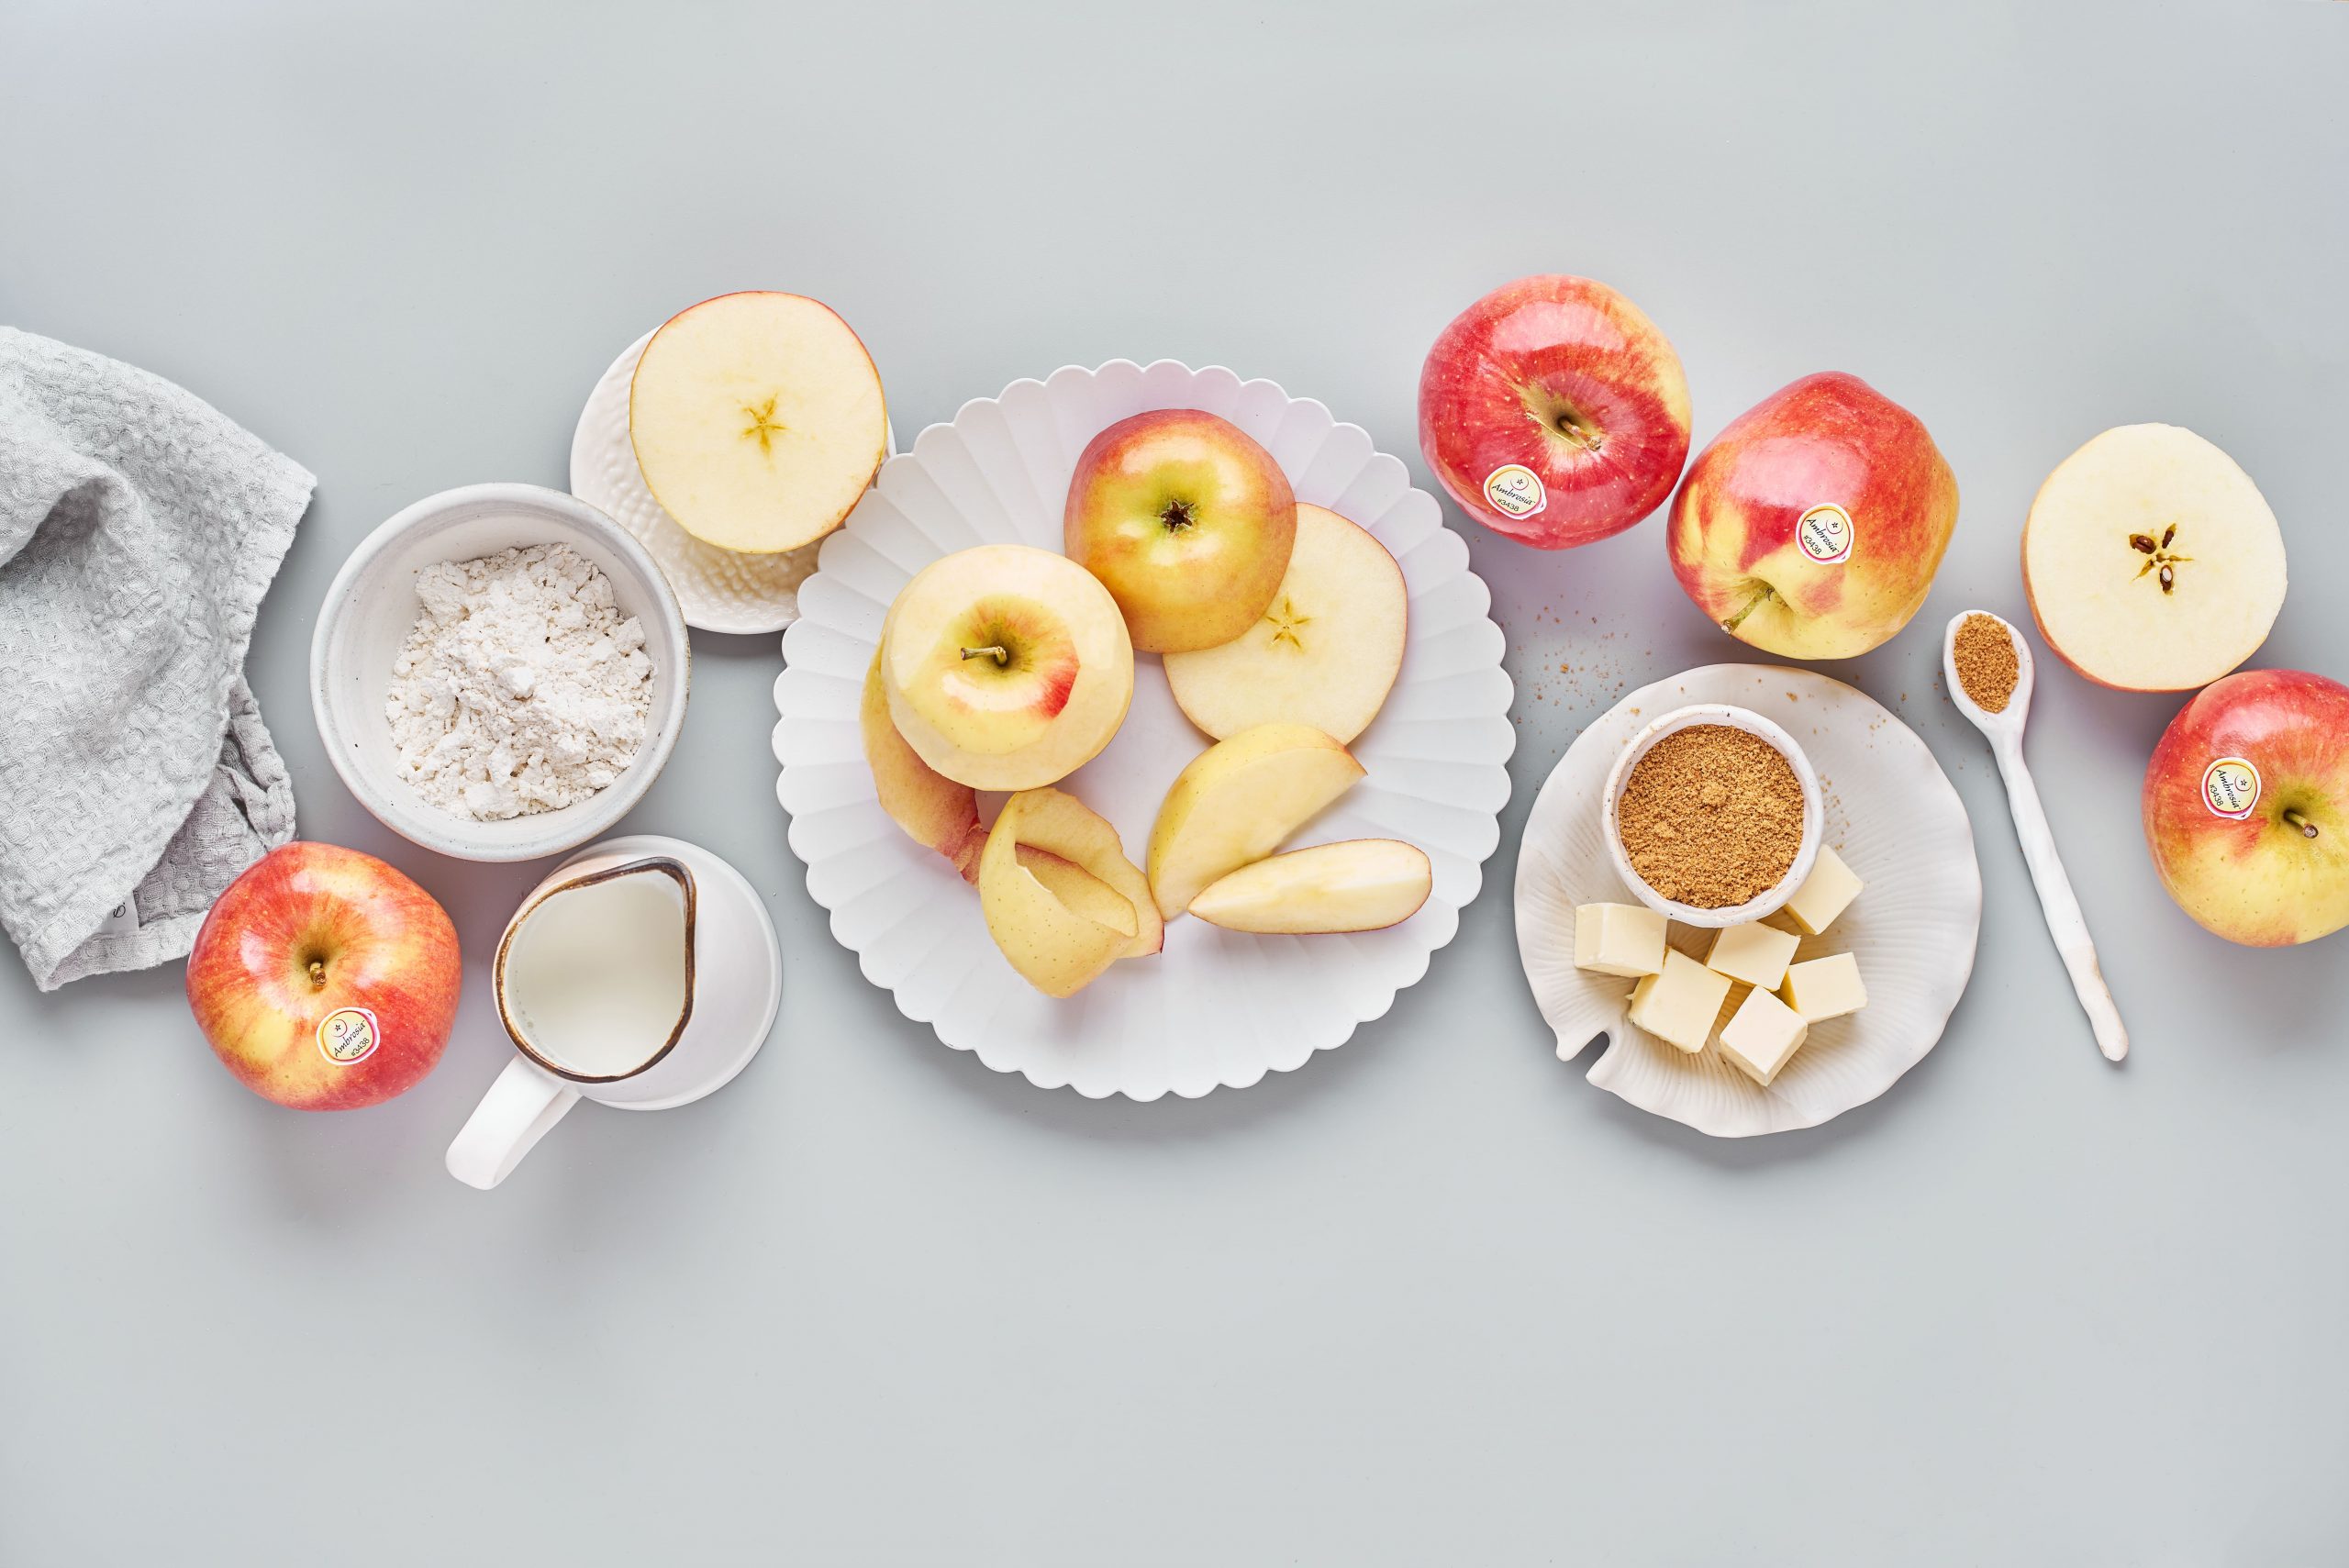 Ambrosia ™ delights our palates with tasty apple-starring recipes